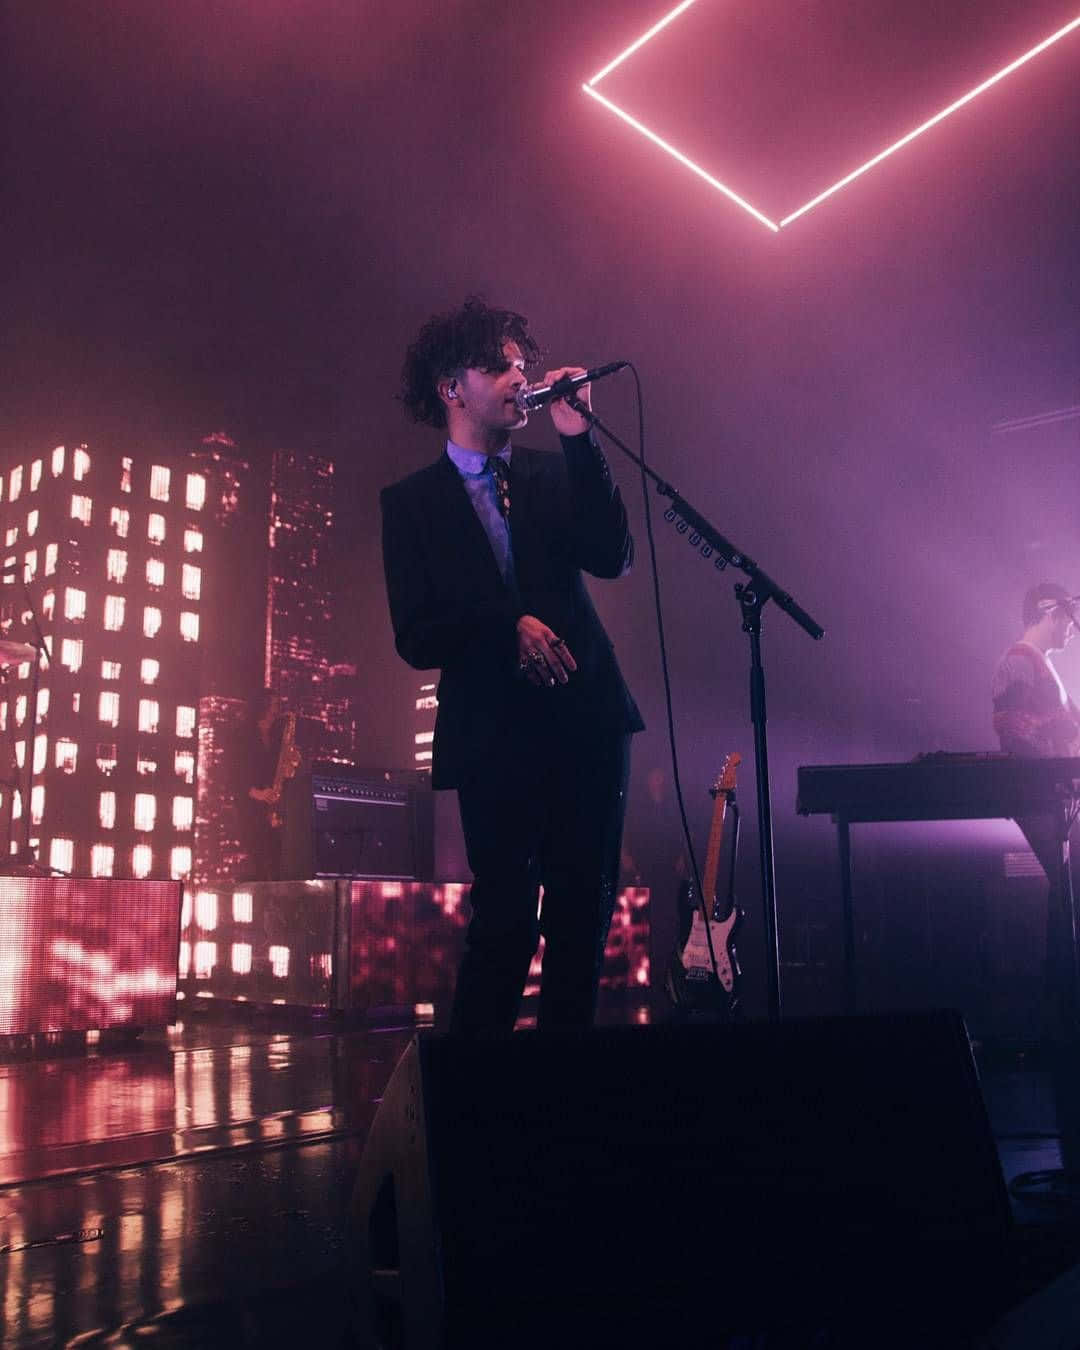 A Man In A Suit Singing On Stage Wallpaper